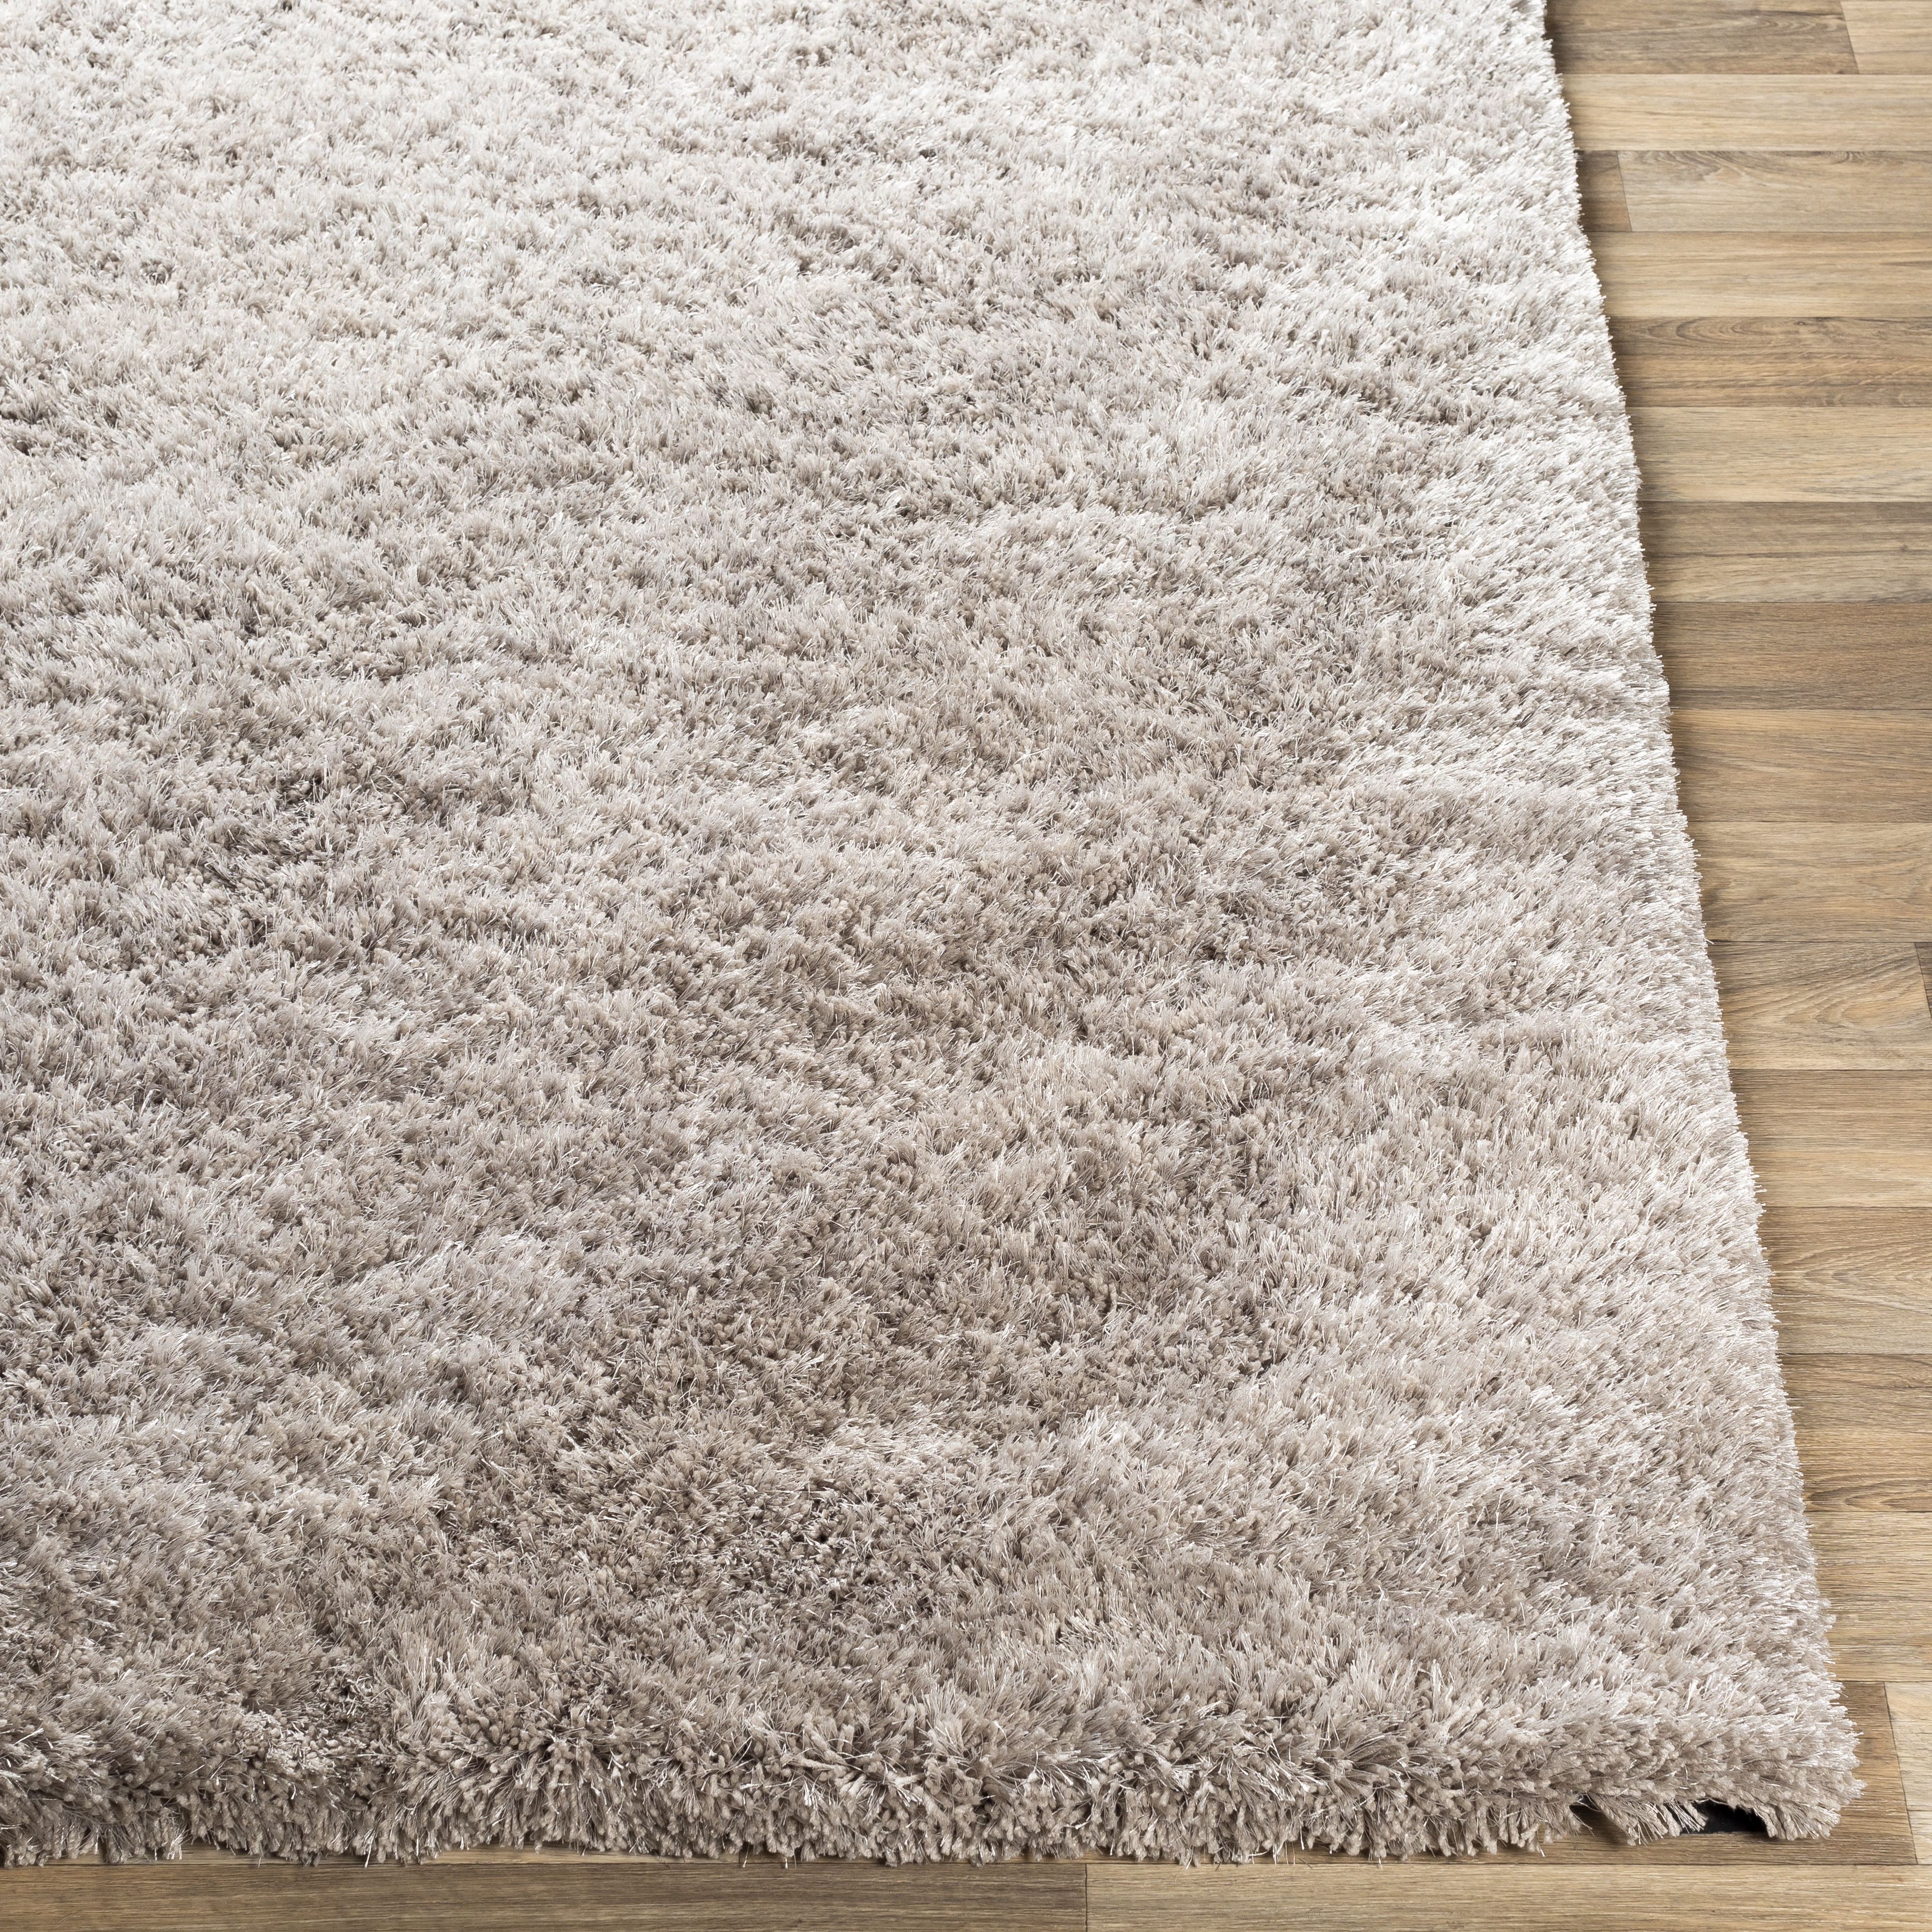 Grizzly Rug, 9' x 12' - Image 2